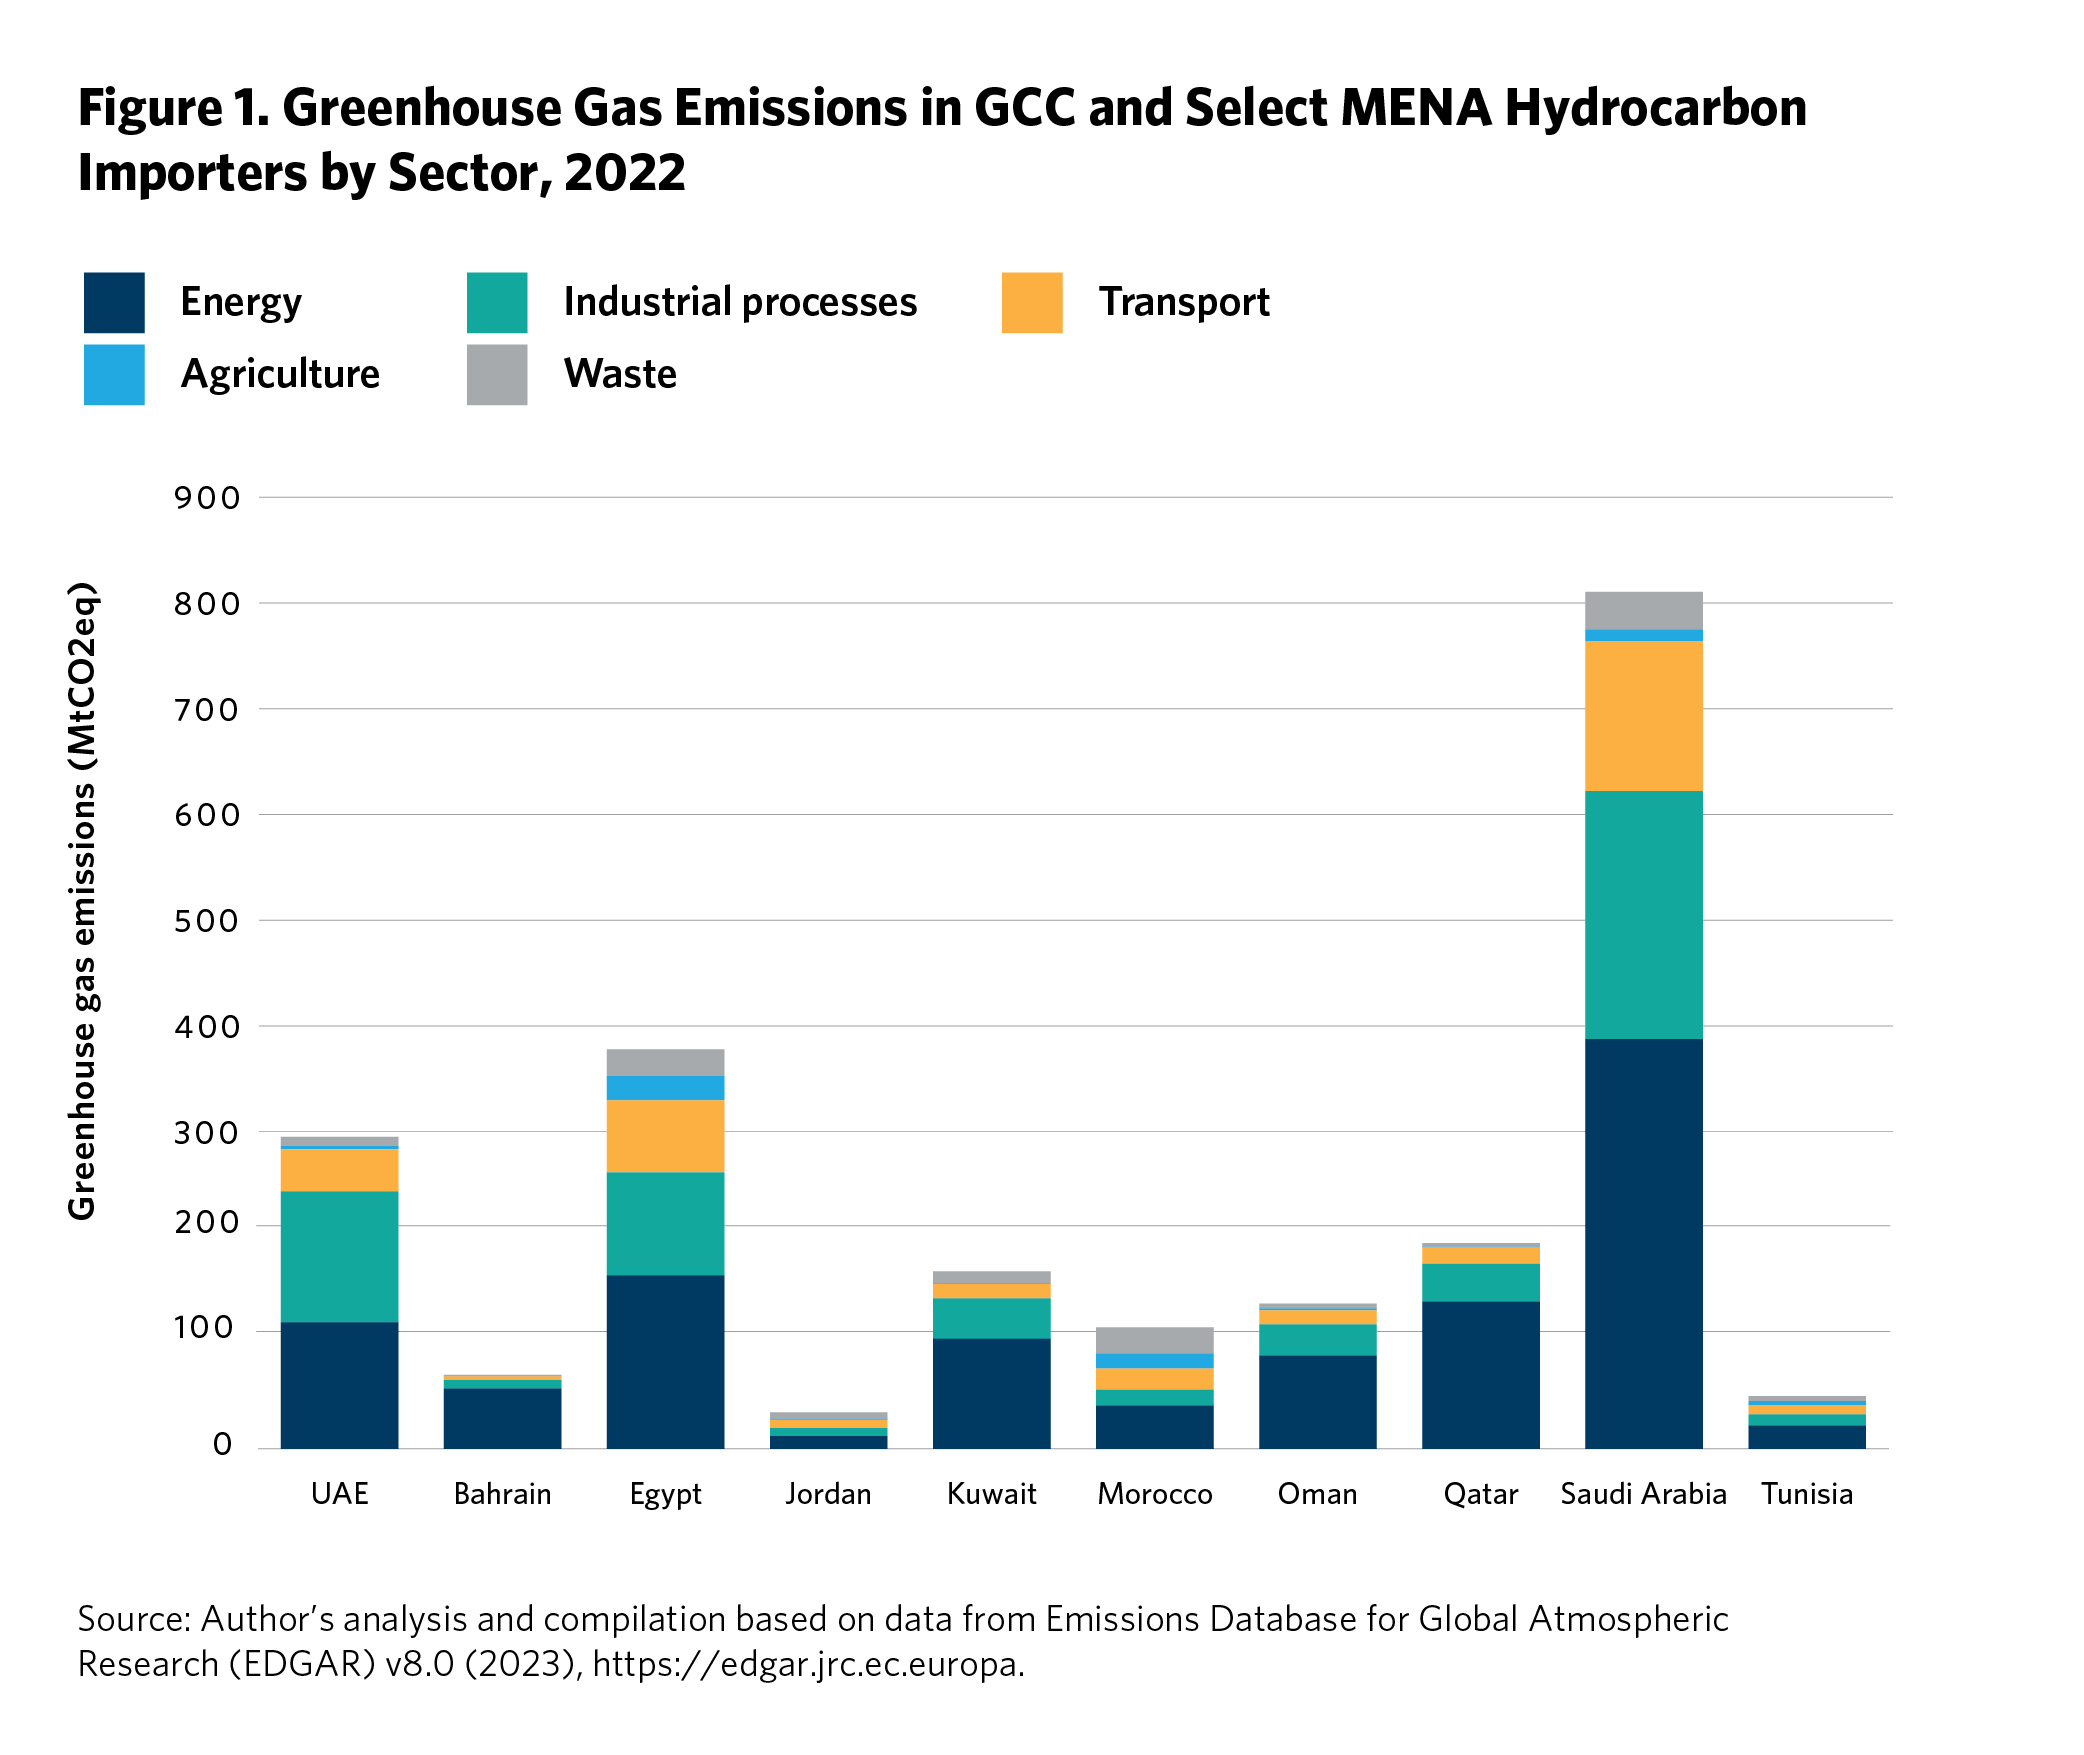 Figure 1: Greenhouse Gas Emissions in GCC and Select MENA Hydrocarbon Importers by Sector, 2022